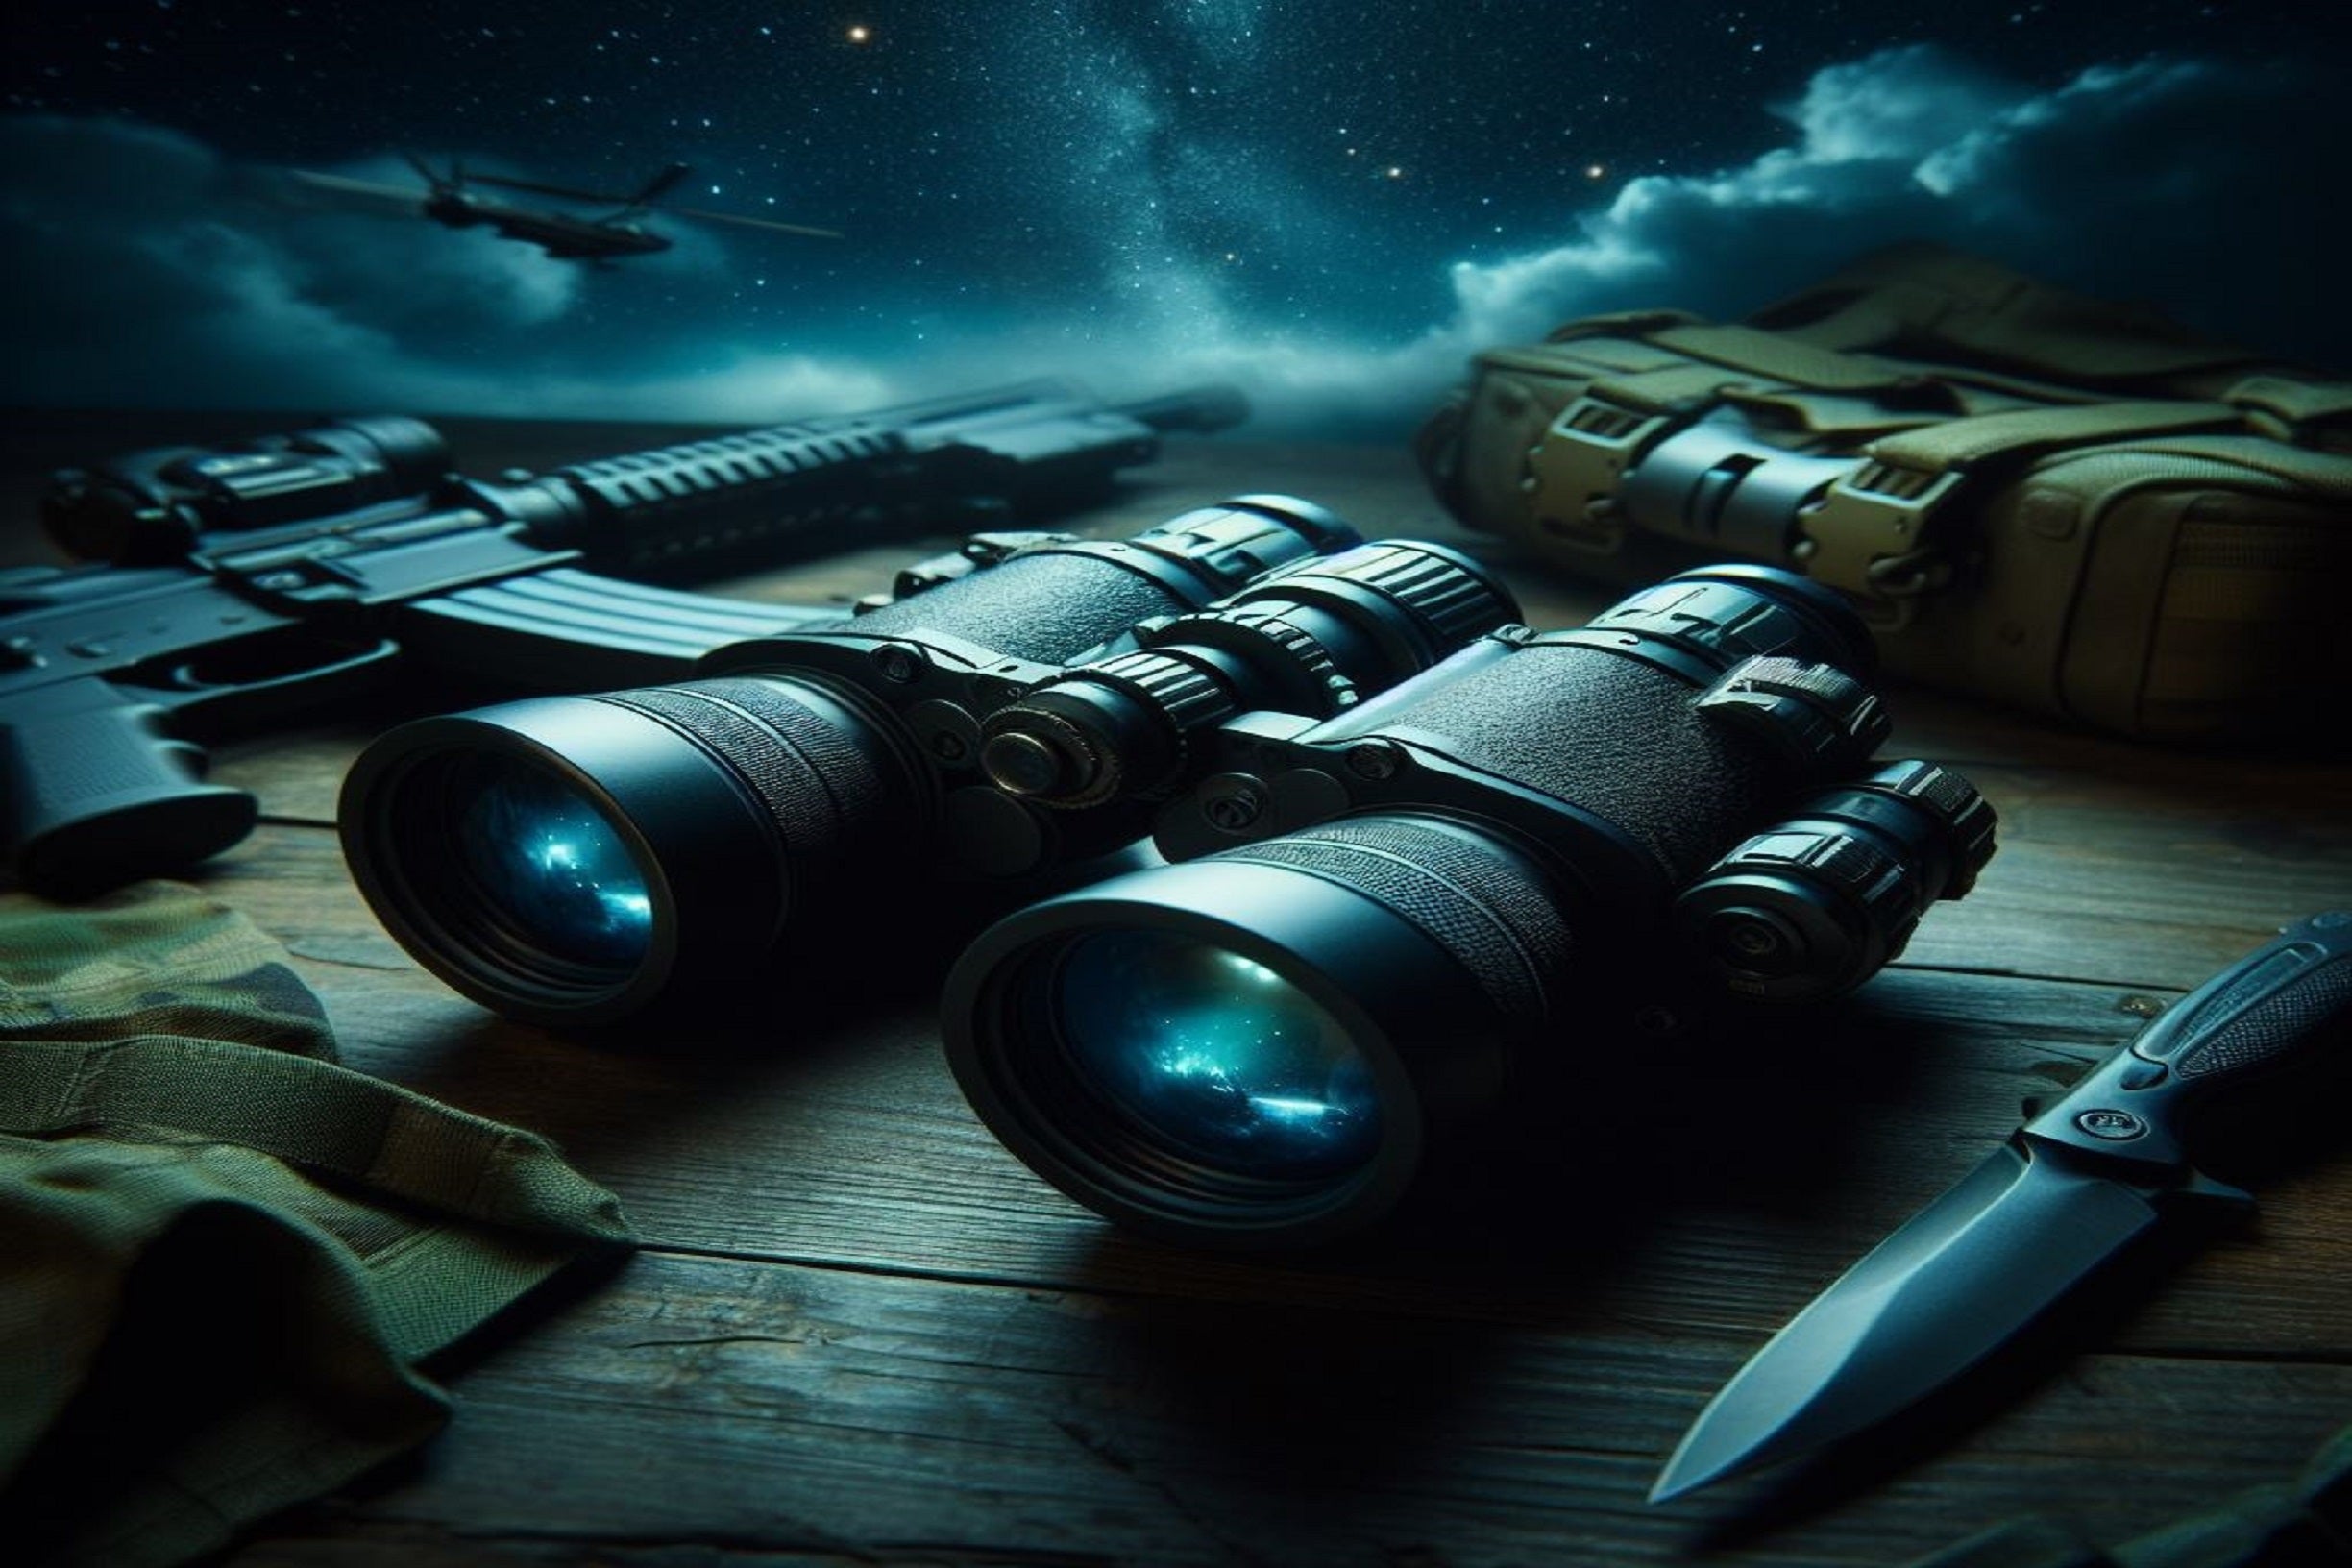 Night vision goggles binoculars and tactical gear on a wooden surface under a moonlit sky, illustrating the use of night vision goggles and night vision binoculars in outdoor and military settings.